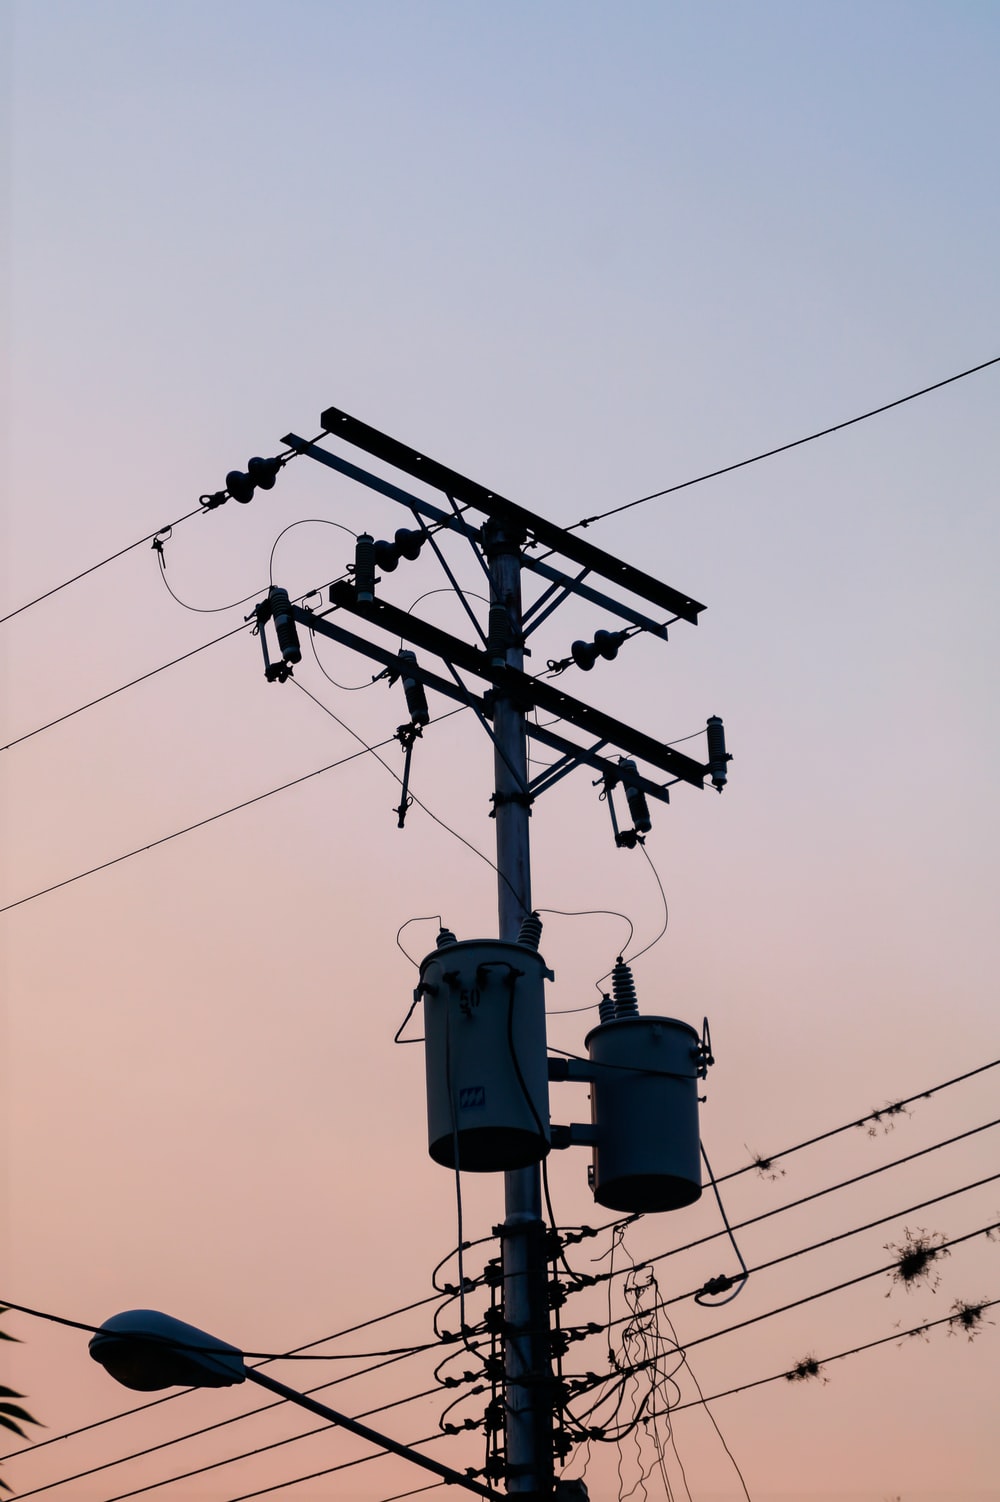 1K+ Electricity Pole Picture. Download Free Image